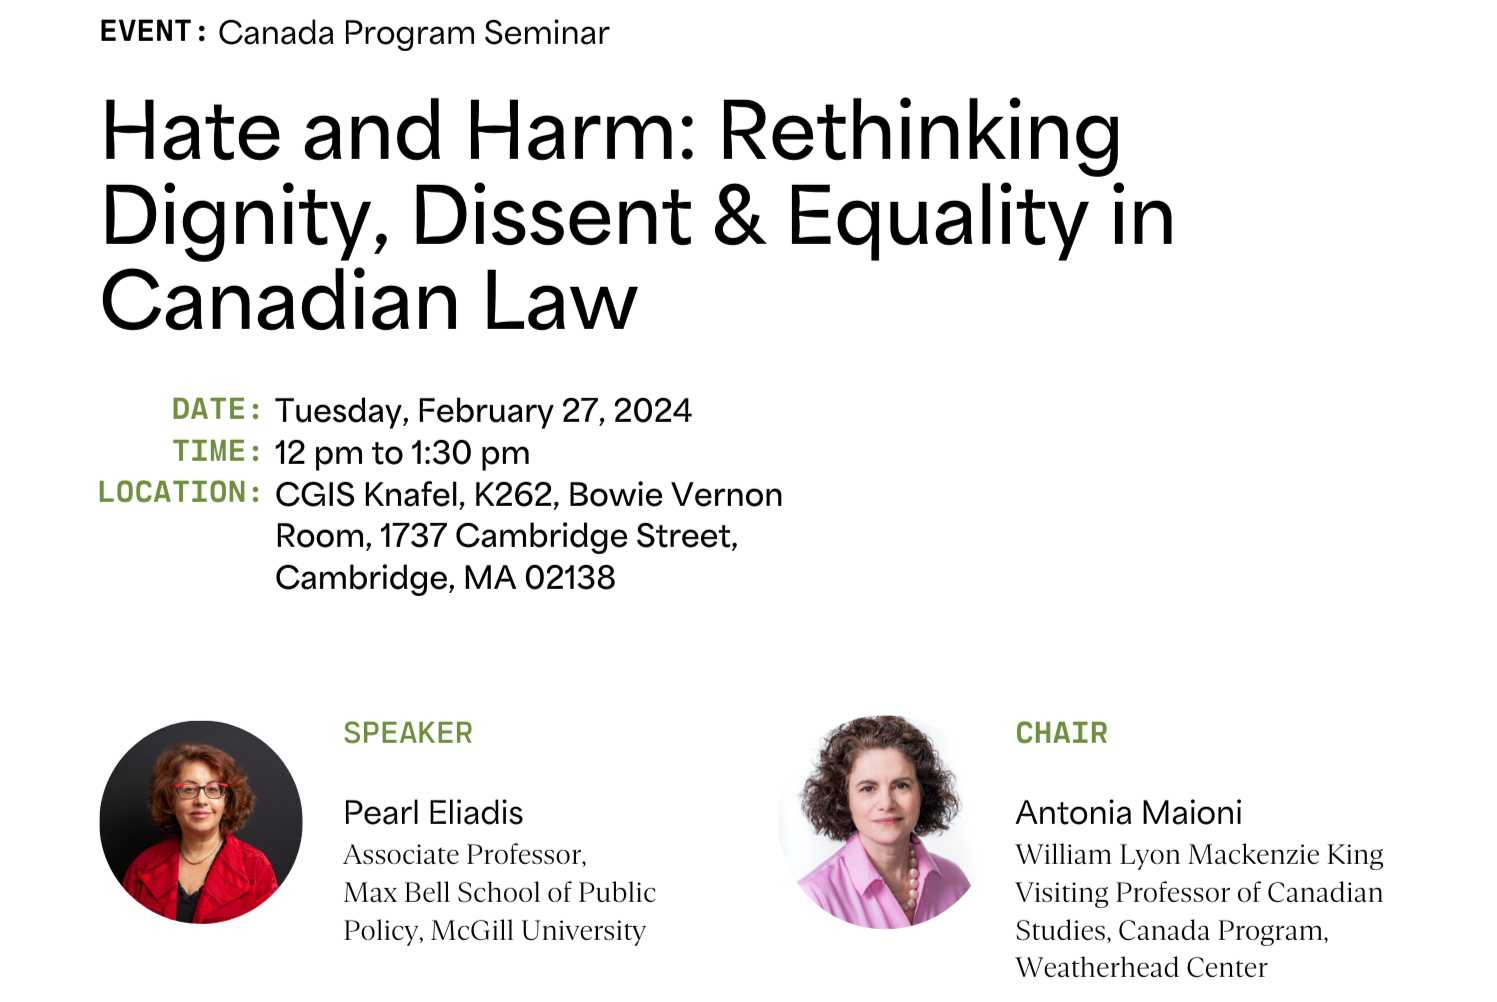 Event banner for "Hate and Harm: Rethinking Dignity, Dissent & Equality in Canadian Law" on February 27 at 12 pm in CGIS Knafel, K262, Bowie Vernon Room, 1737 Cambridge St, Cambridge. Speakers Pearl Eliadis and Antonia Maioni.